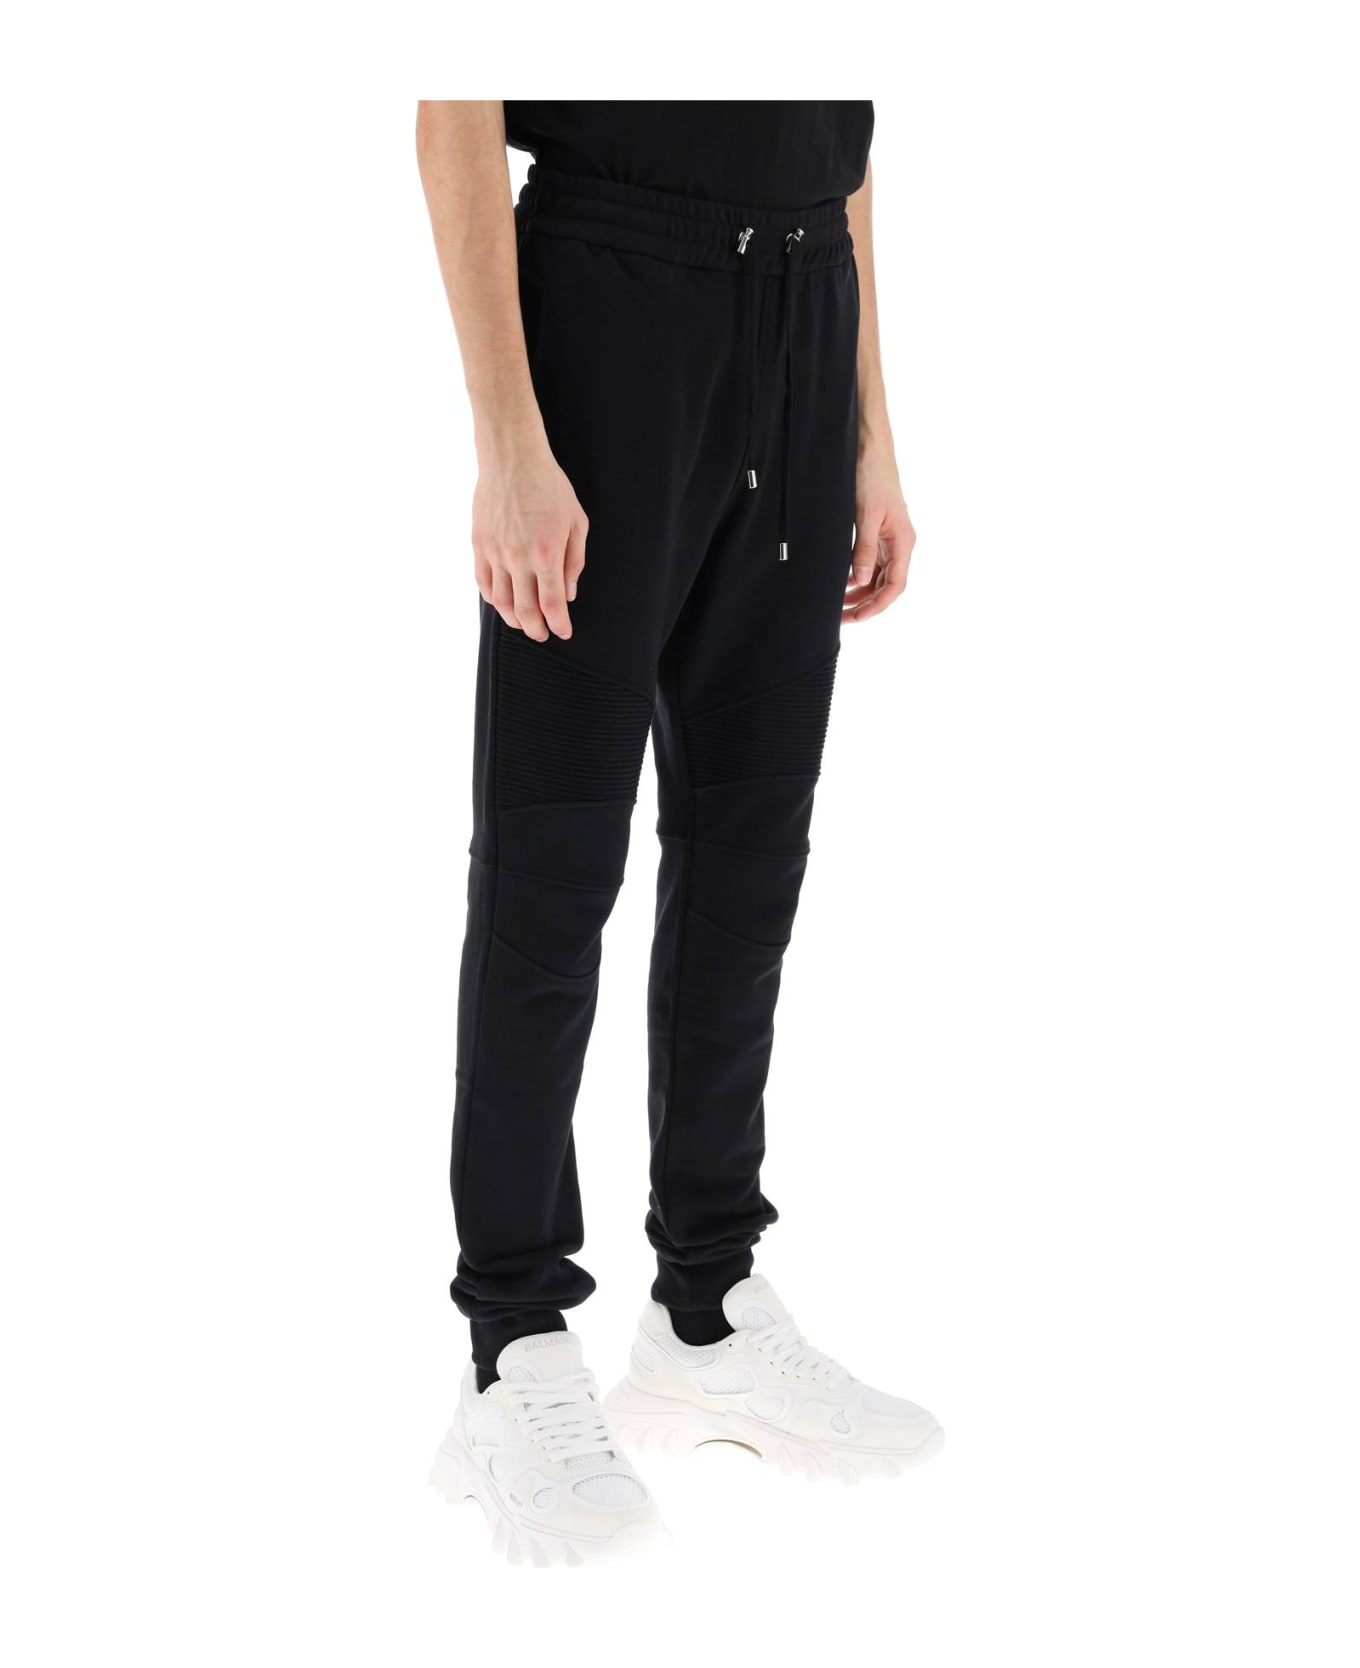 Balmain Joggers With Topstitched Inserts - Noir/blanc